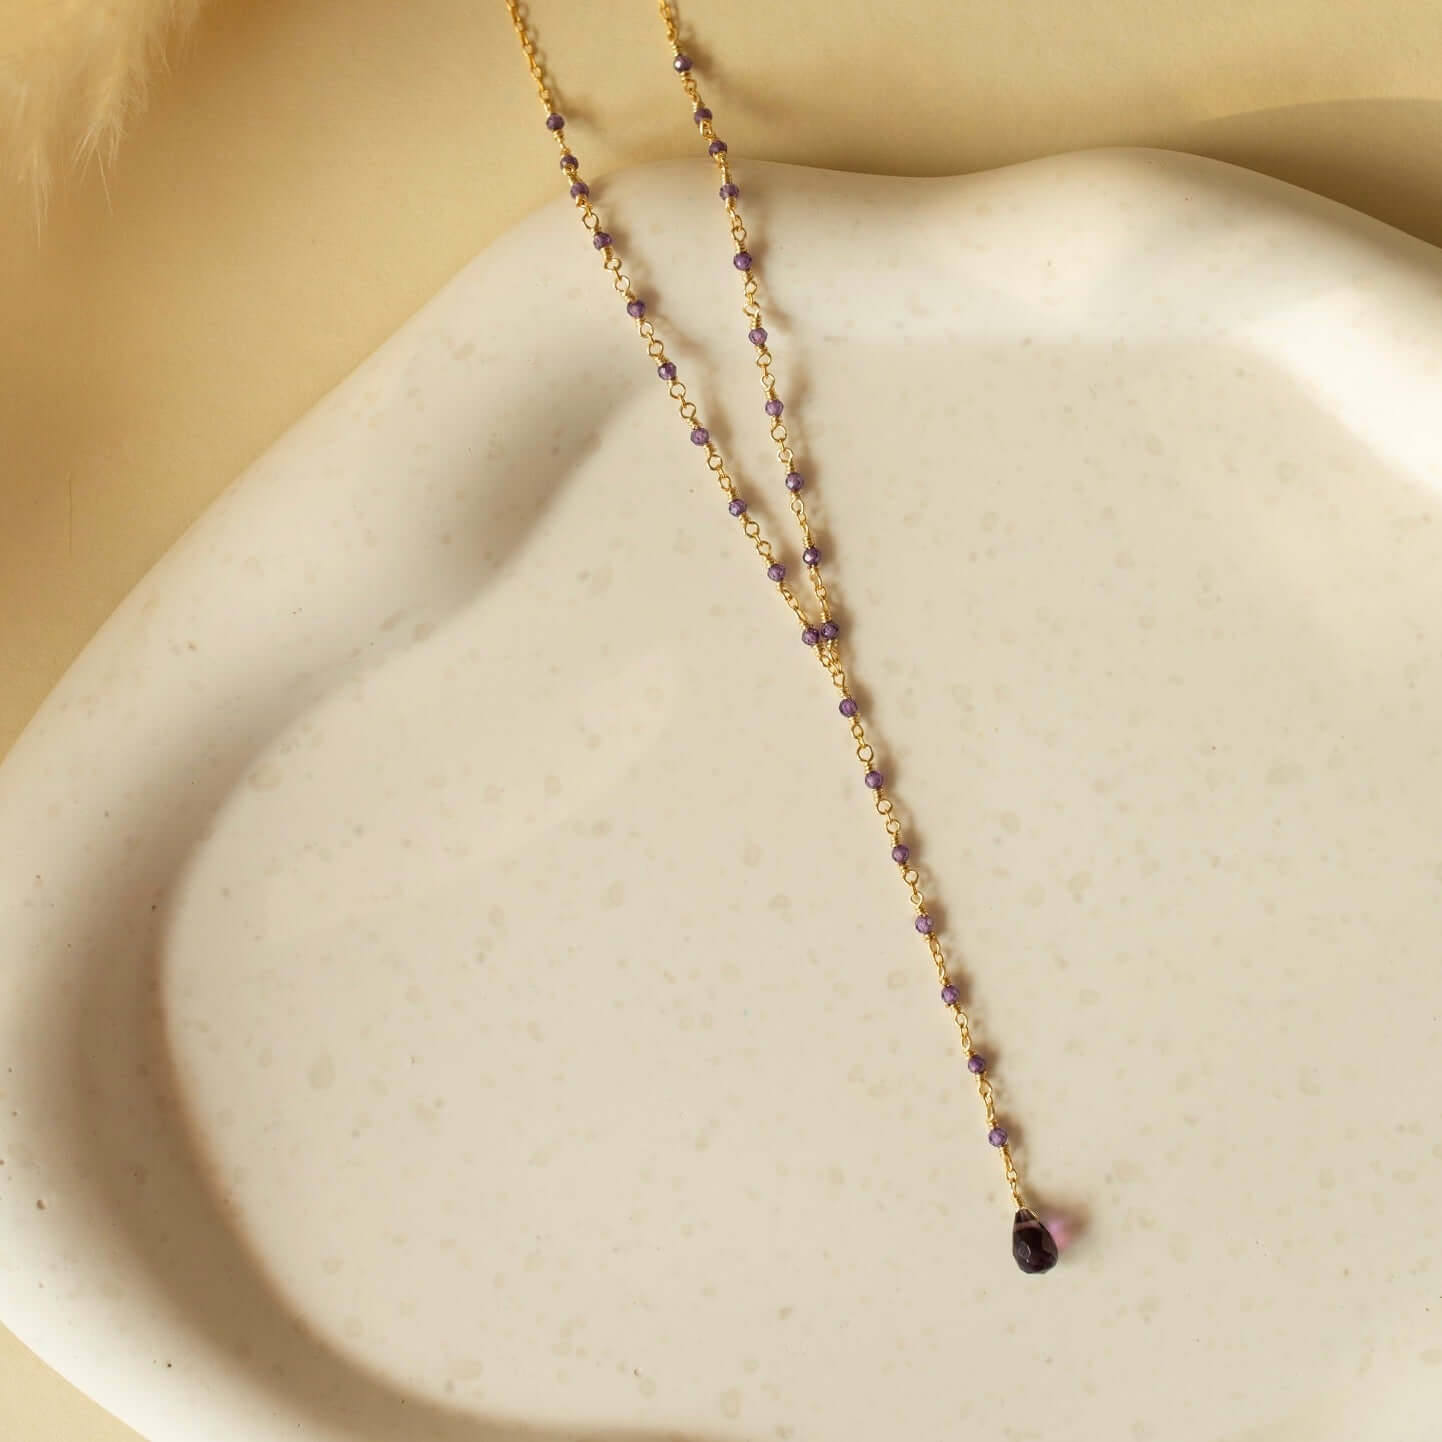 Amethyst necklace on rustic clay—a touch of nature's beauty in deep purple hues.